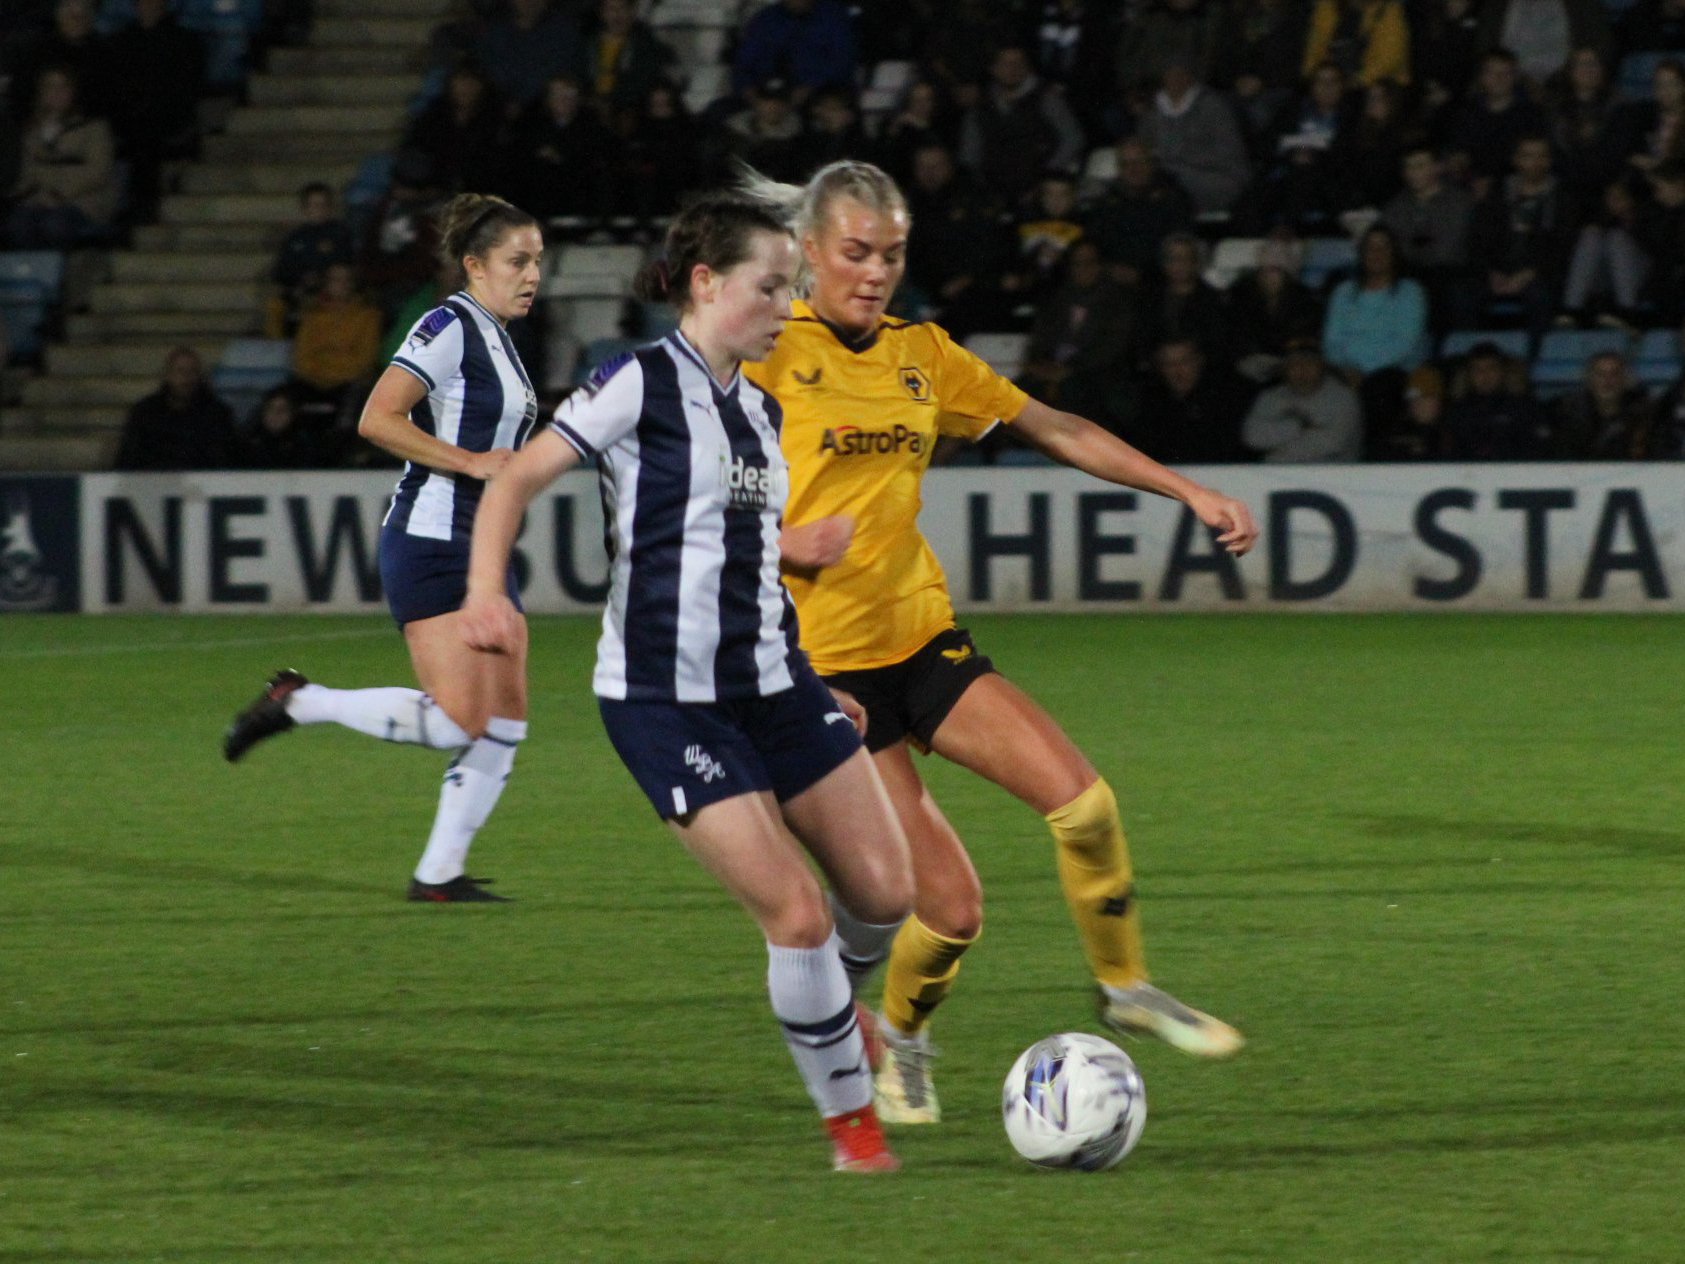 An image of Albion Women player Abi Loydon on the ball against Wolves